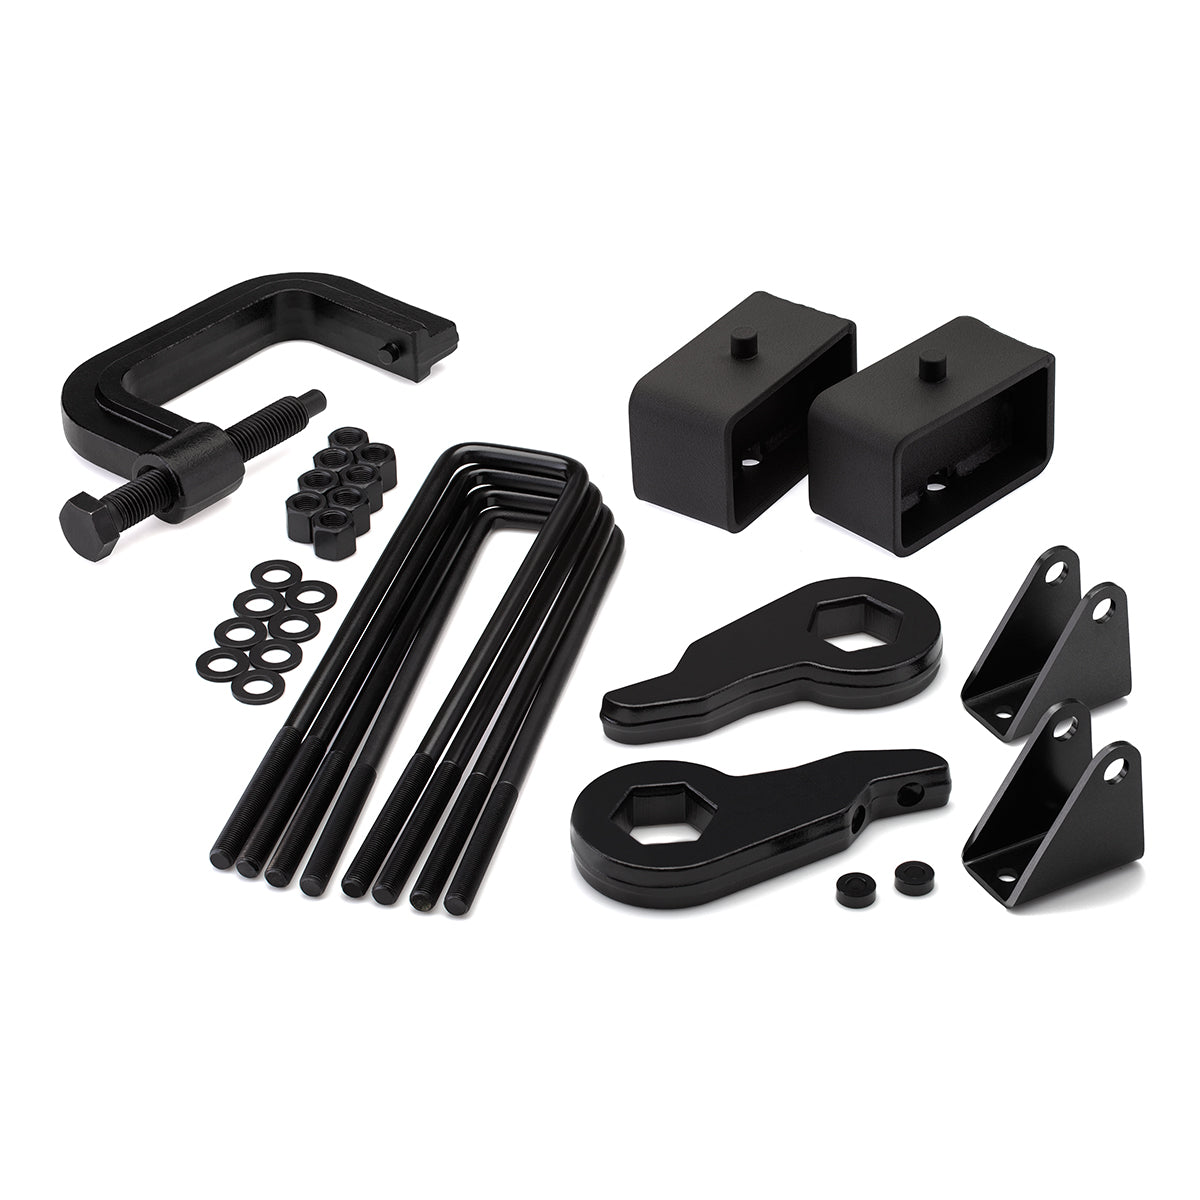 2001-2010 Chevy Silverado 1500HD Full Lift Kit with Shock Extender Brackets and Torsion Key Unloading/Removal Tool